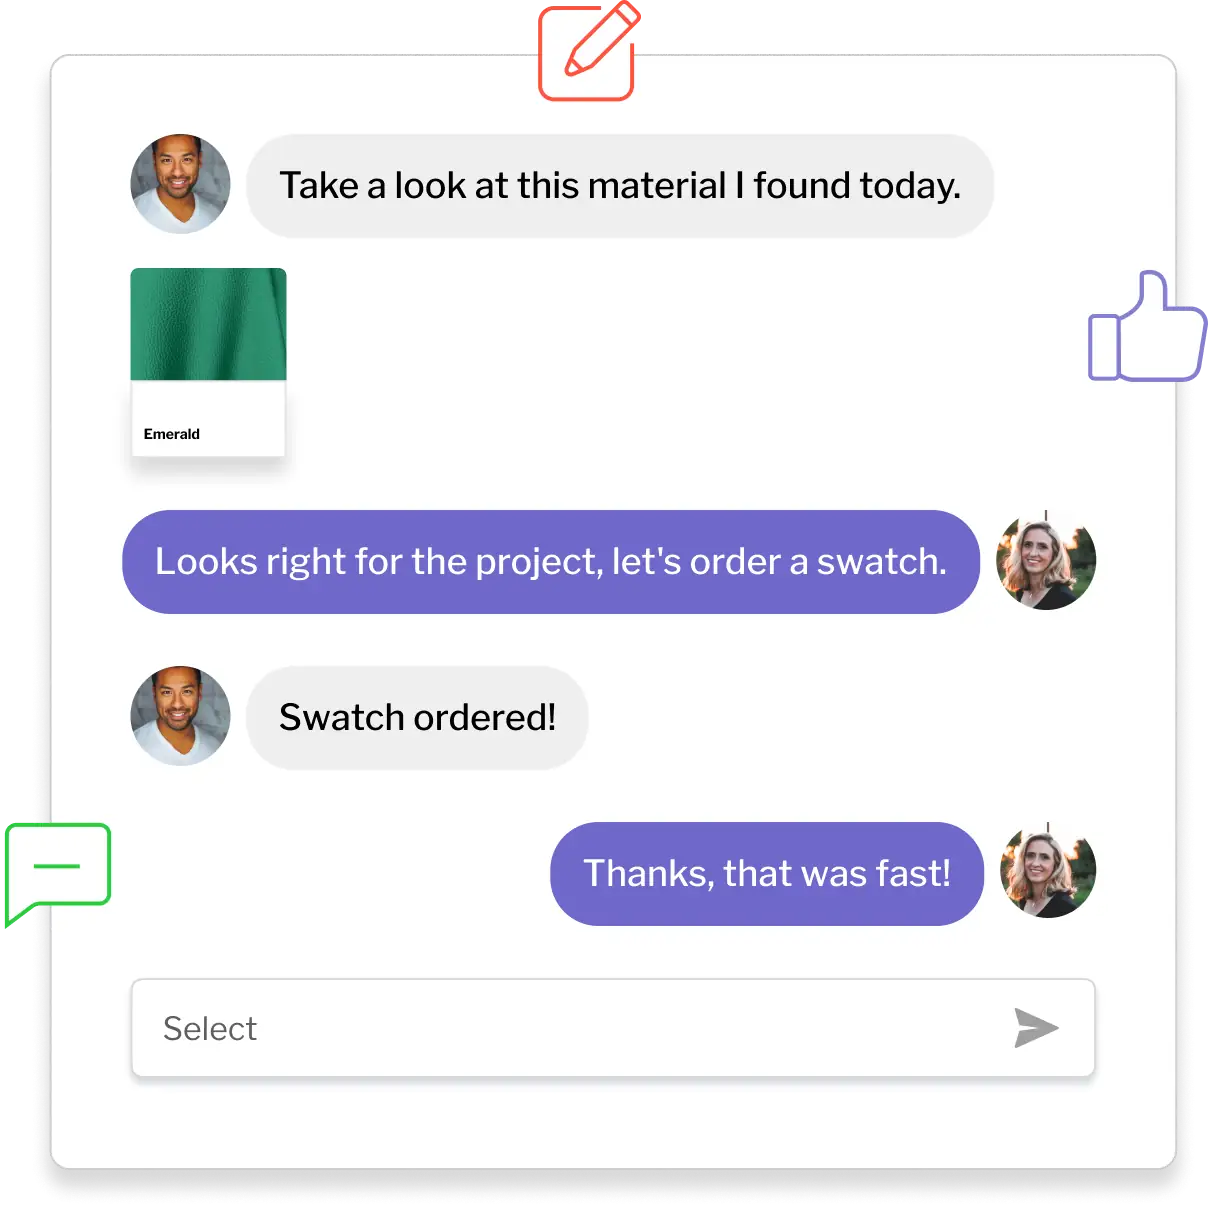 UI depicting a chat between two people, discussing a material swatch, which is embedded in the chat.